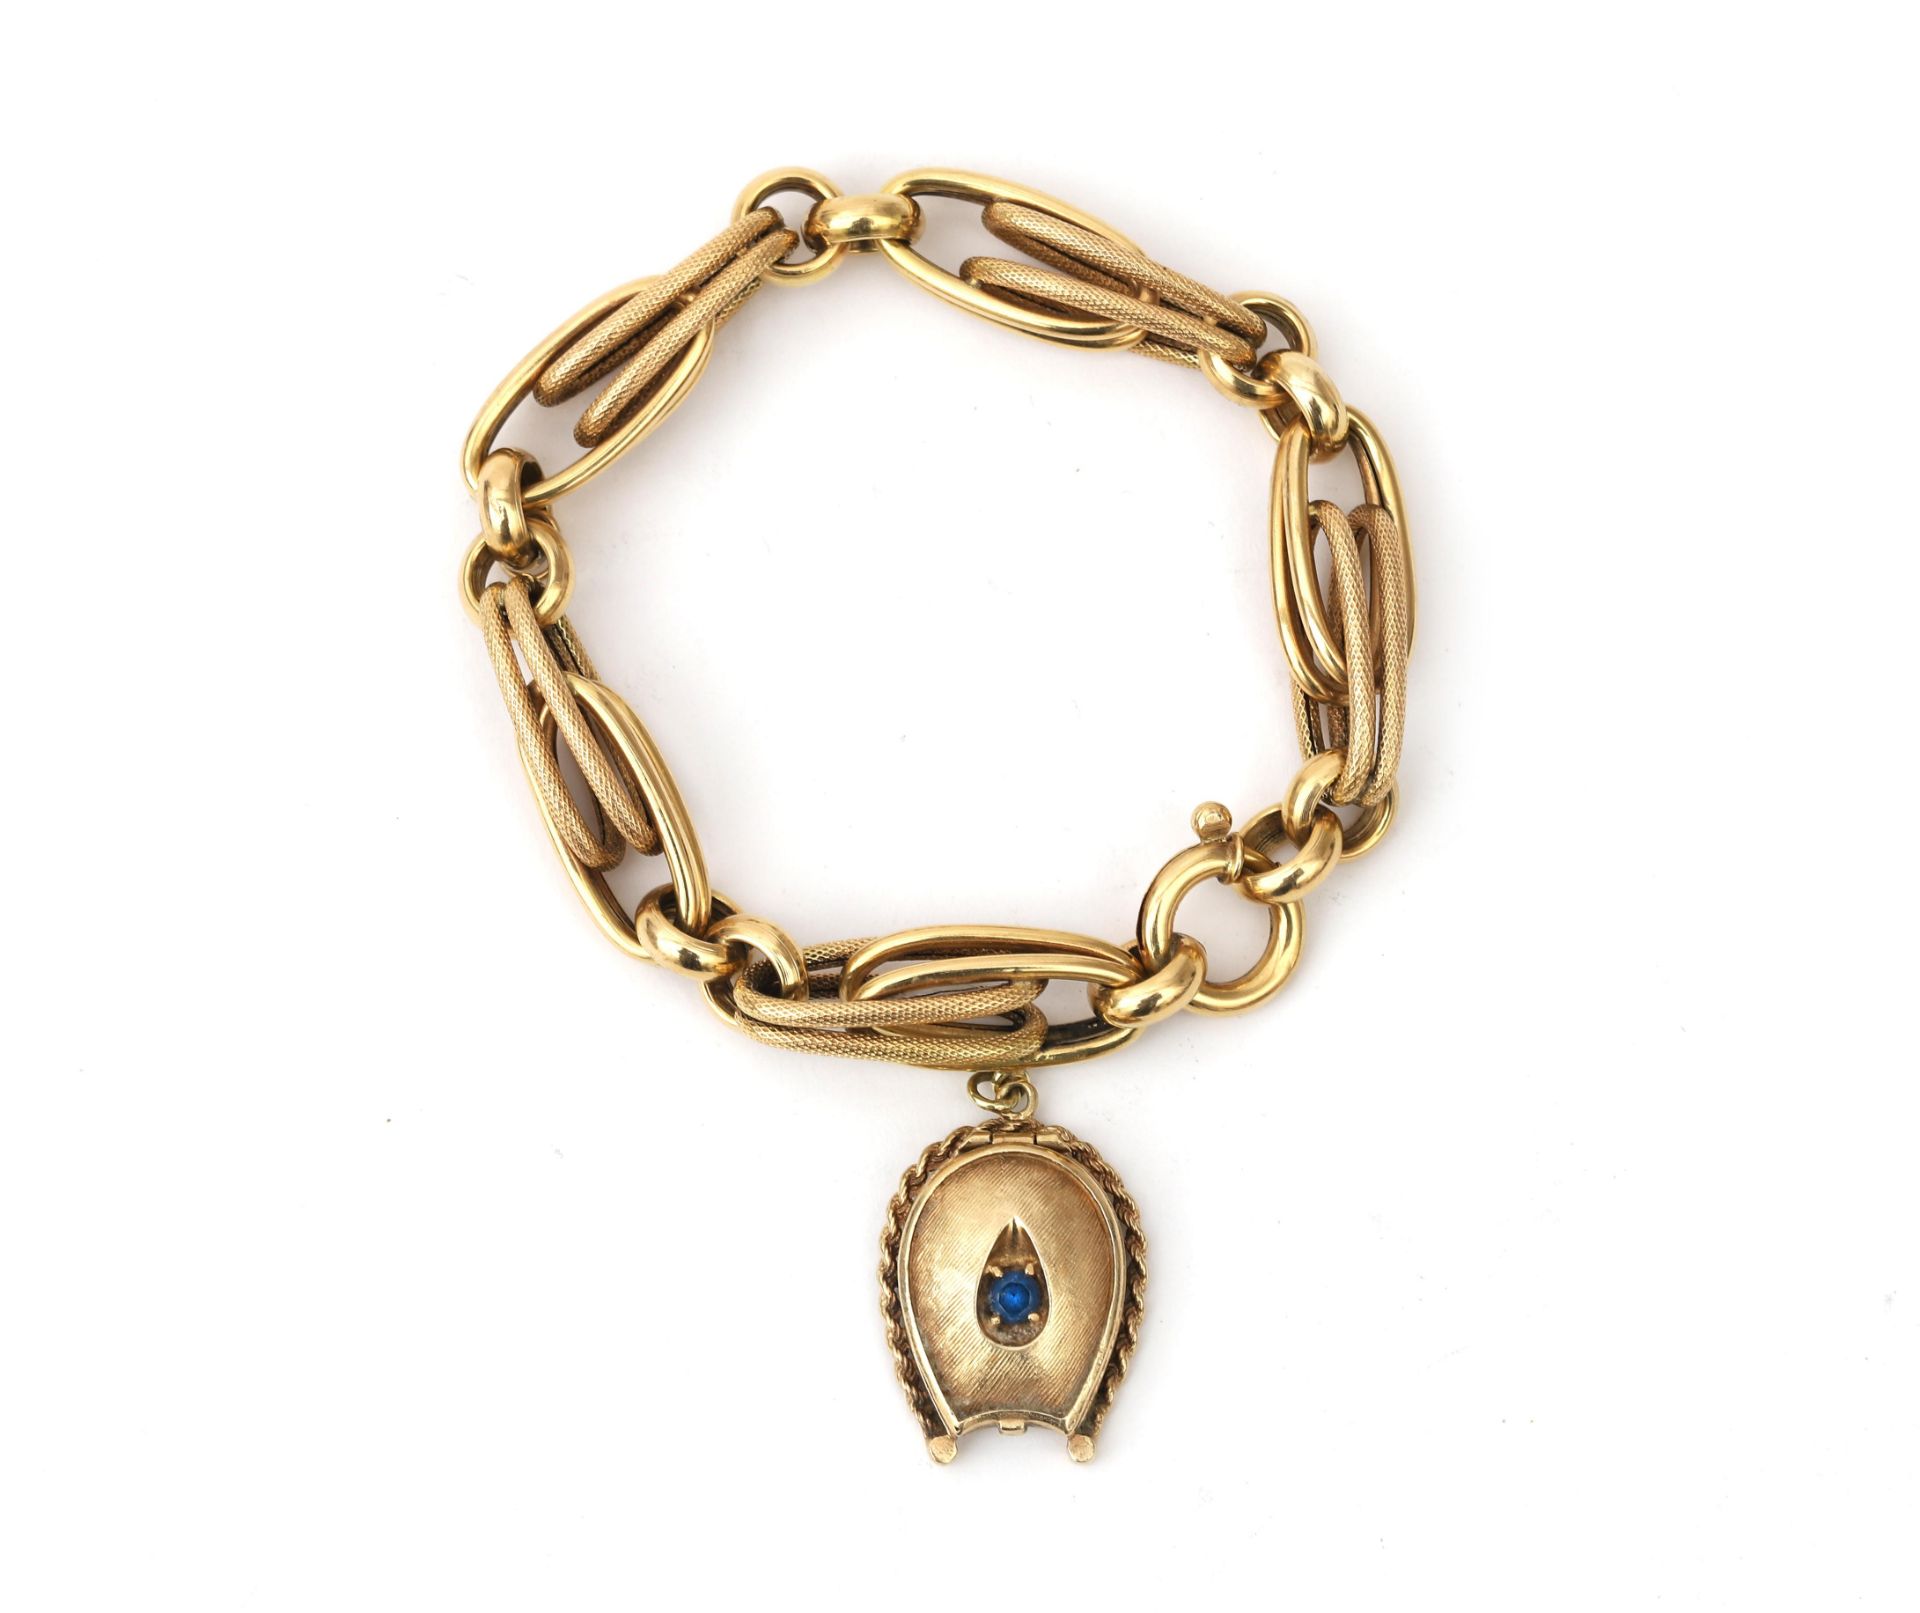 A 14 karat gold link bracelet with a gold locket. The locket is set with a blue paste stone. Oval